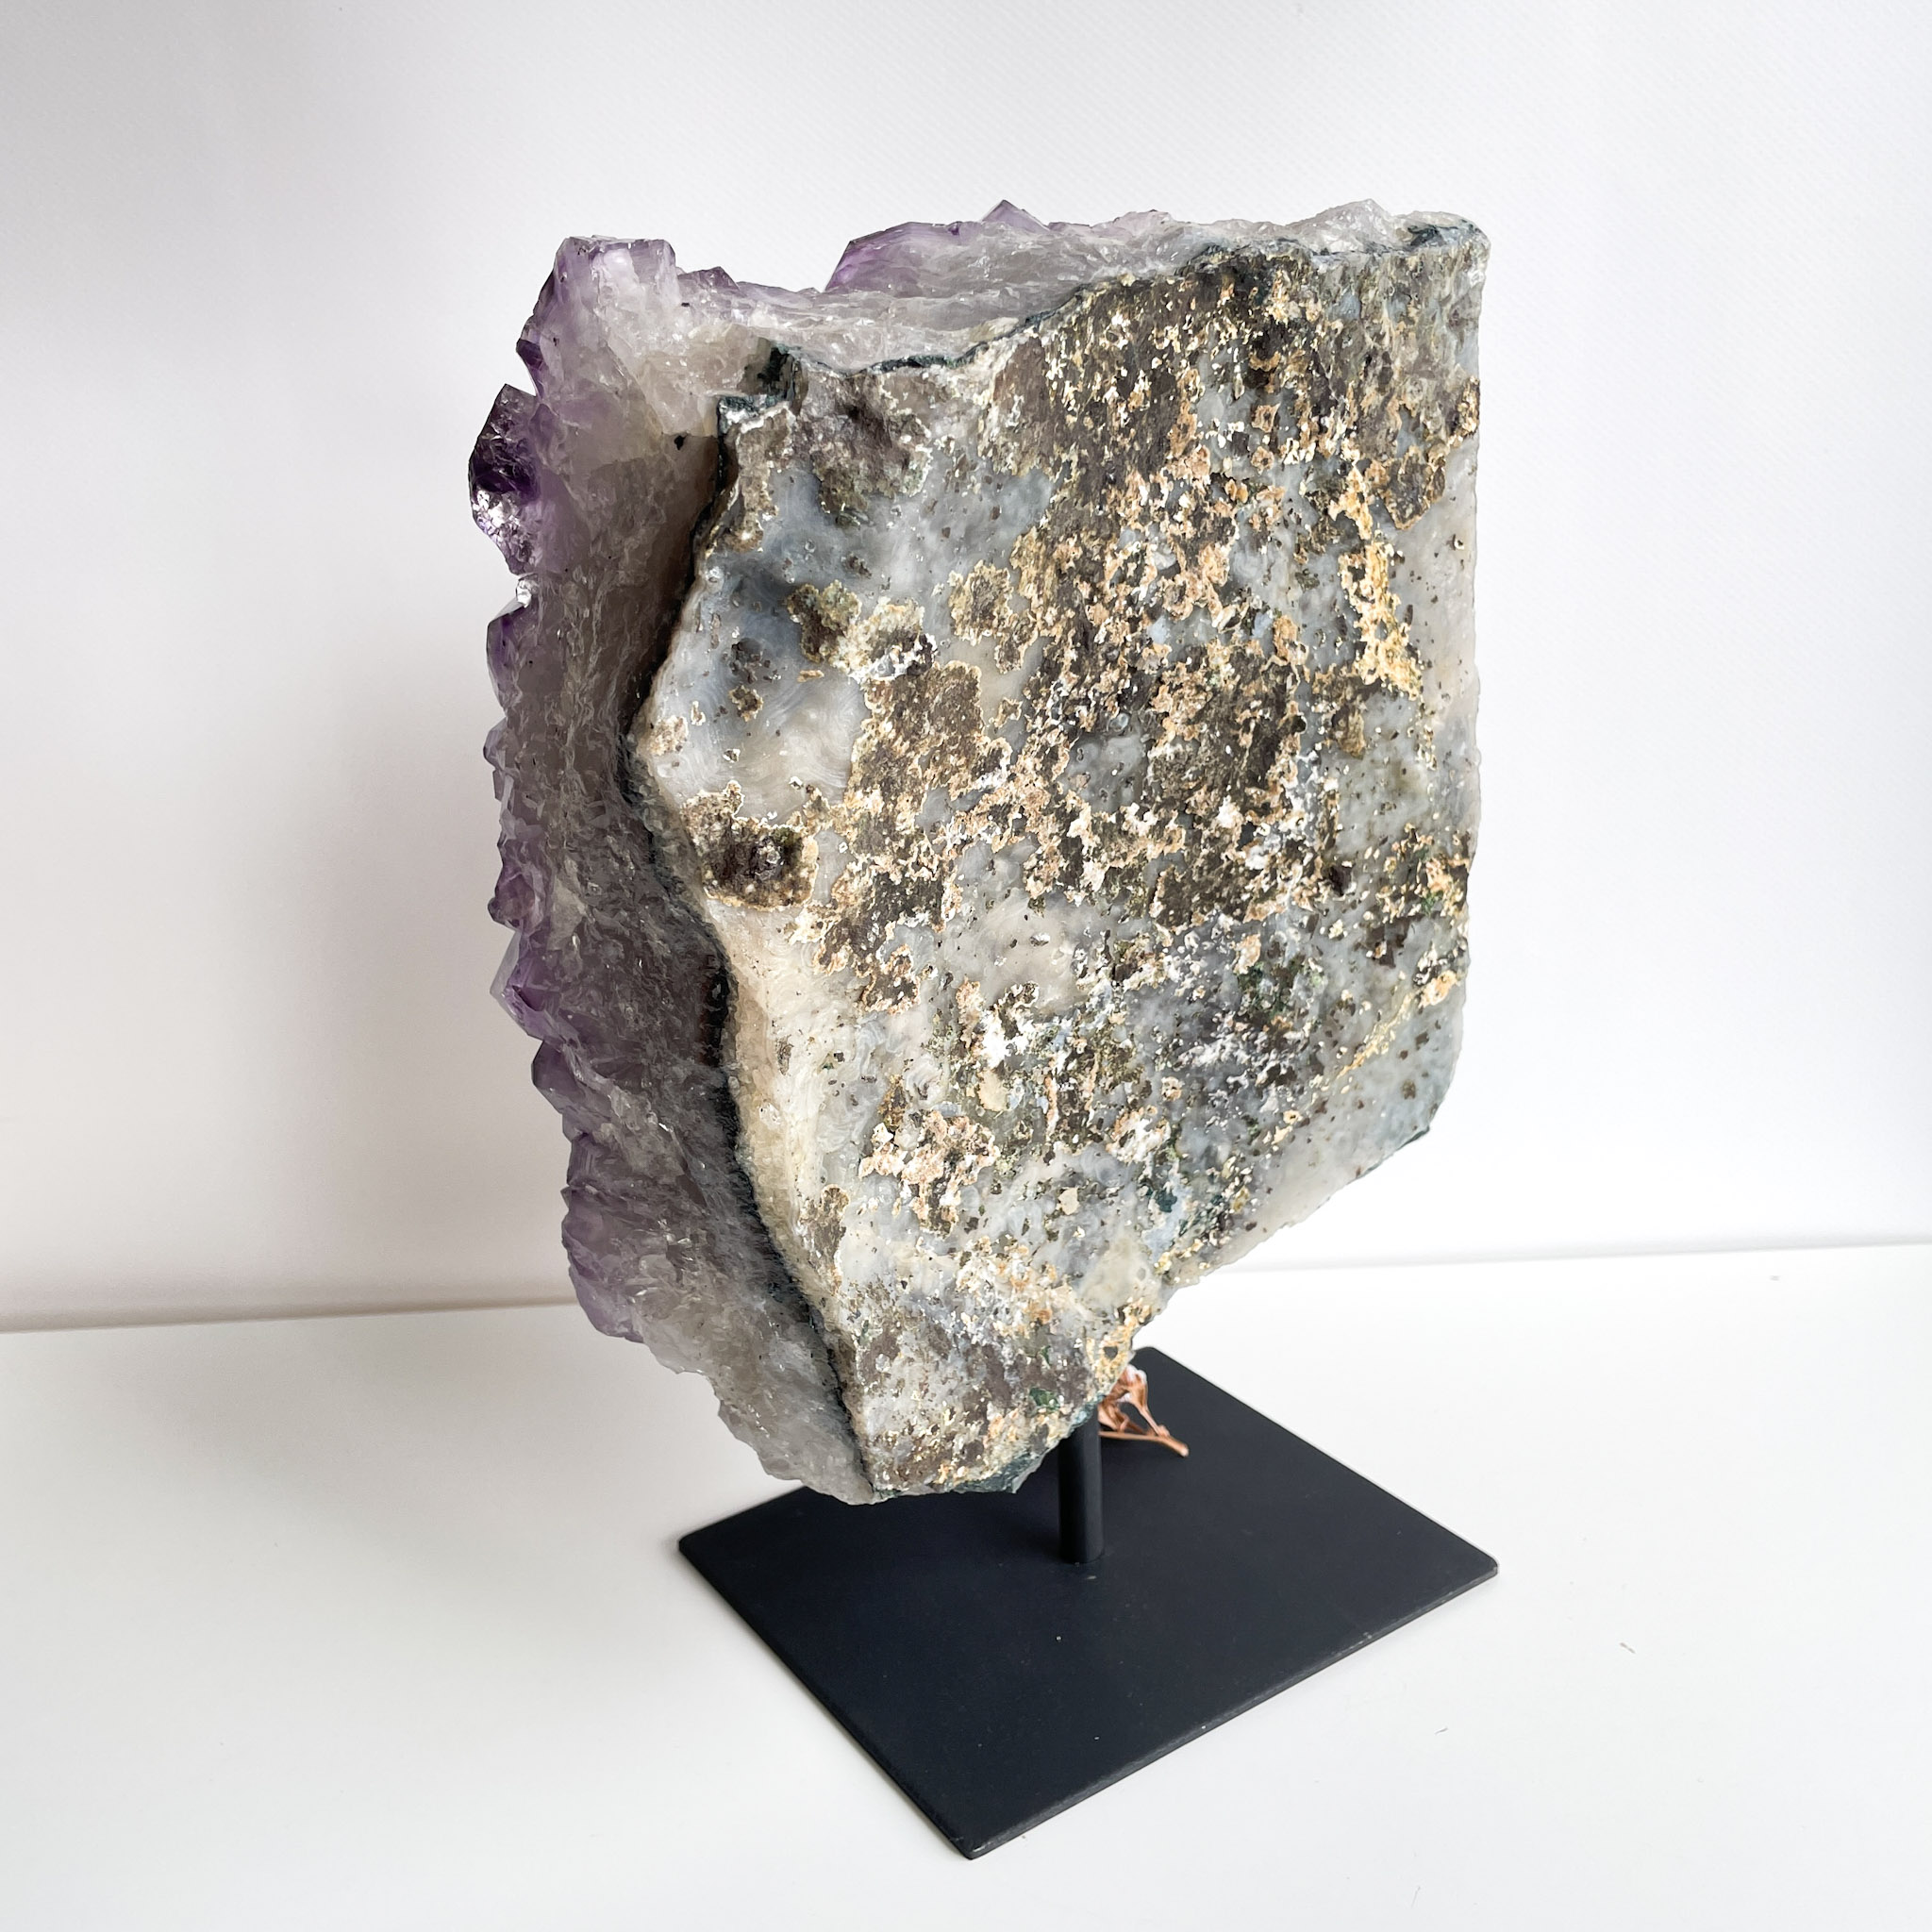 A large amethyst geode on a black stand with visible quartz crystals framing the purple amethyst interior, against a white background.